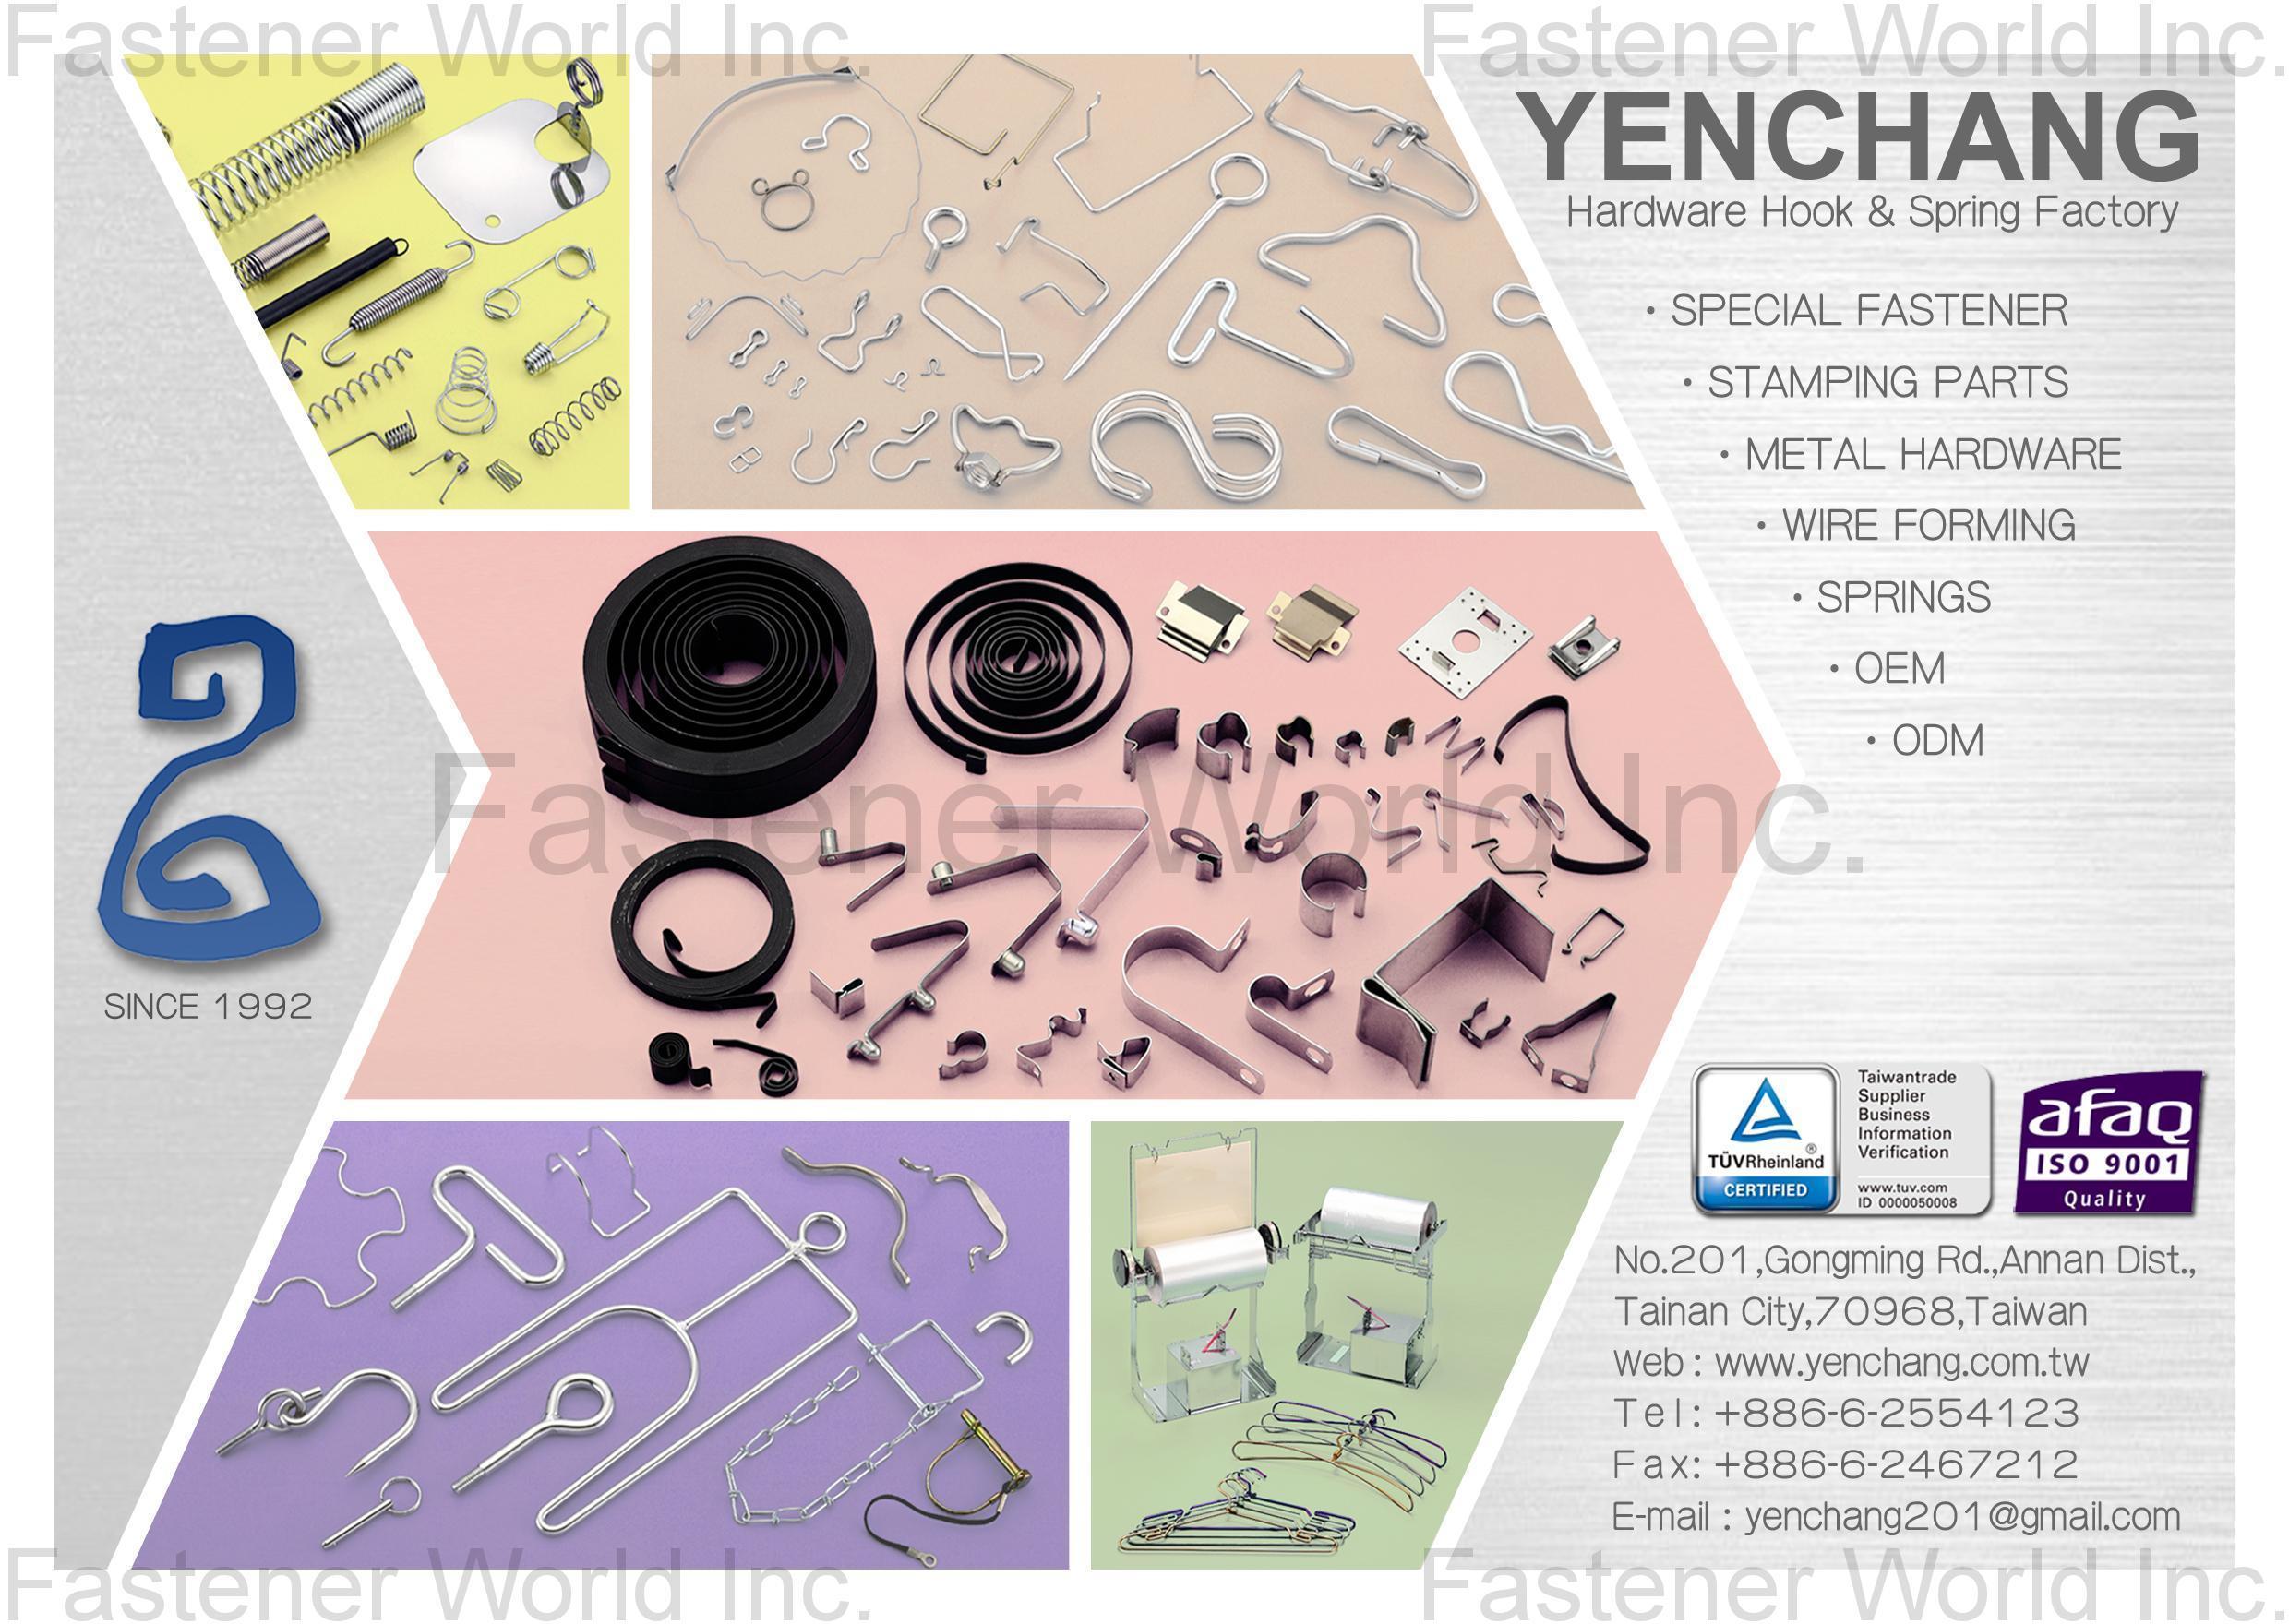 YENCHANG HARDWARE HOOK & SPRING FACTORY , Special Fastener, Stamping Parts, Metal Hardware, Wire Forming, Springs, OEM, ODM , Stamped Parts